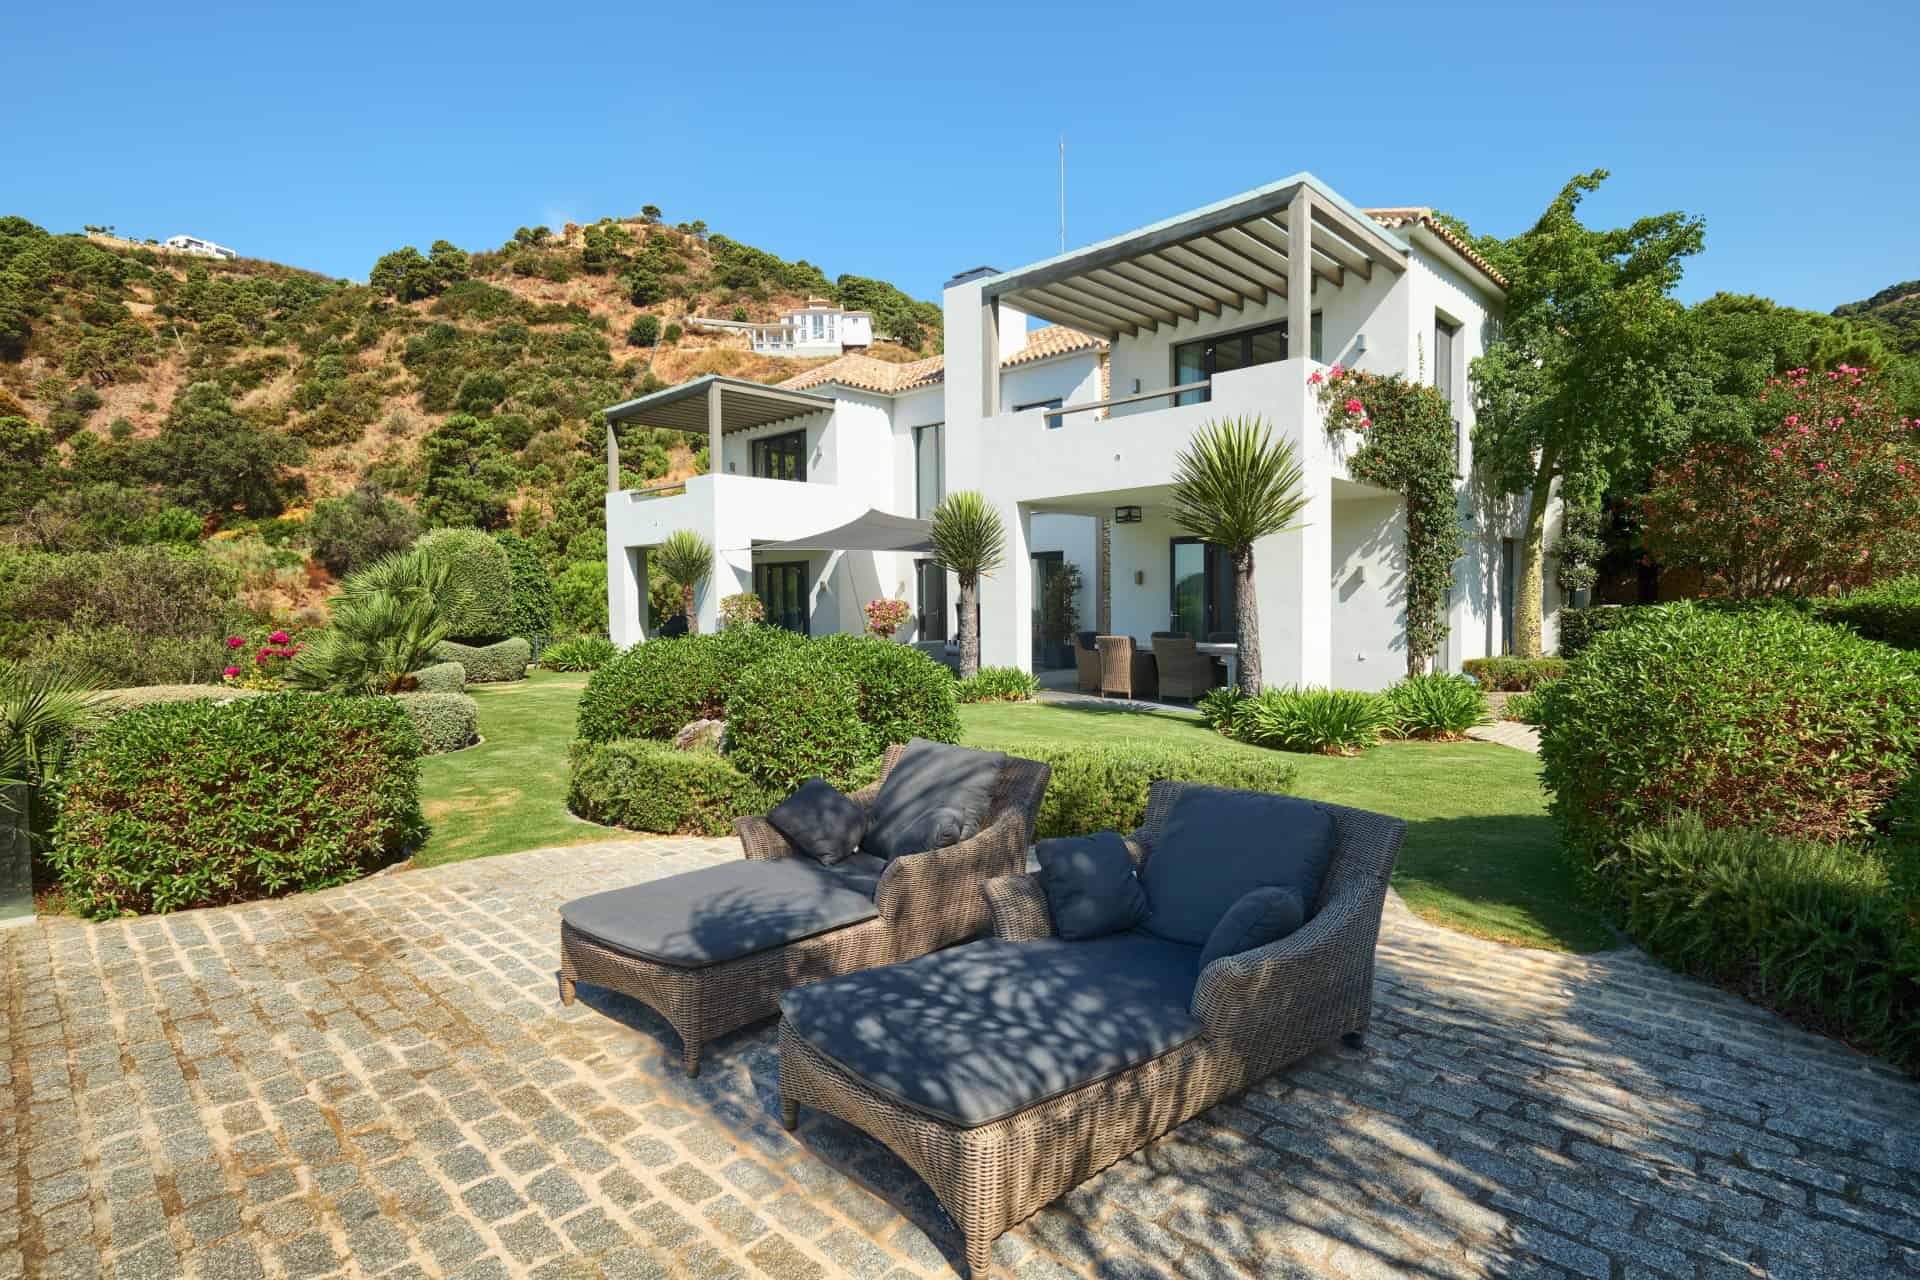 Enjoy the Marbella lifestyle in an oasis of green